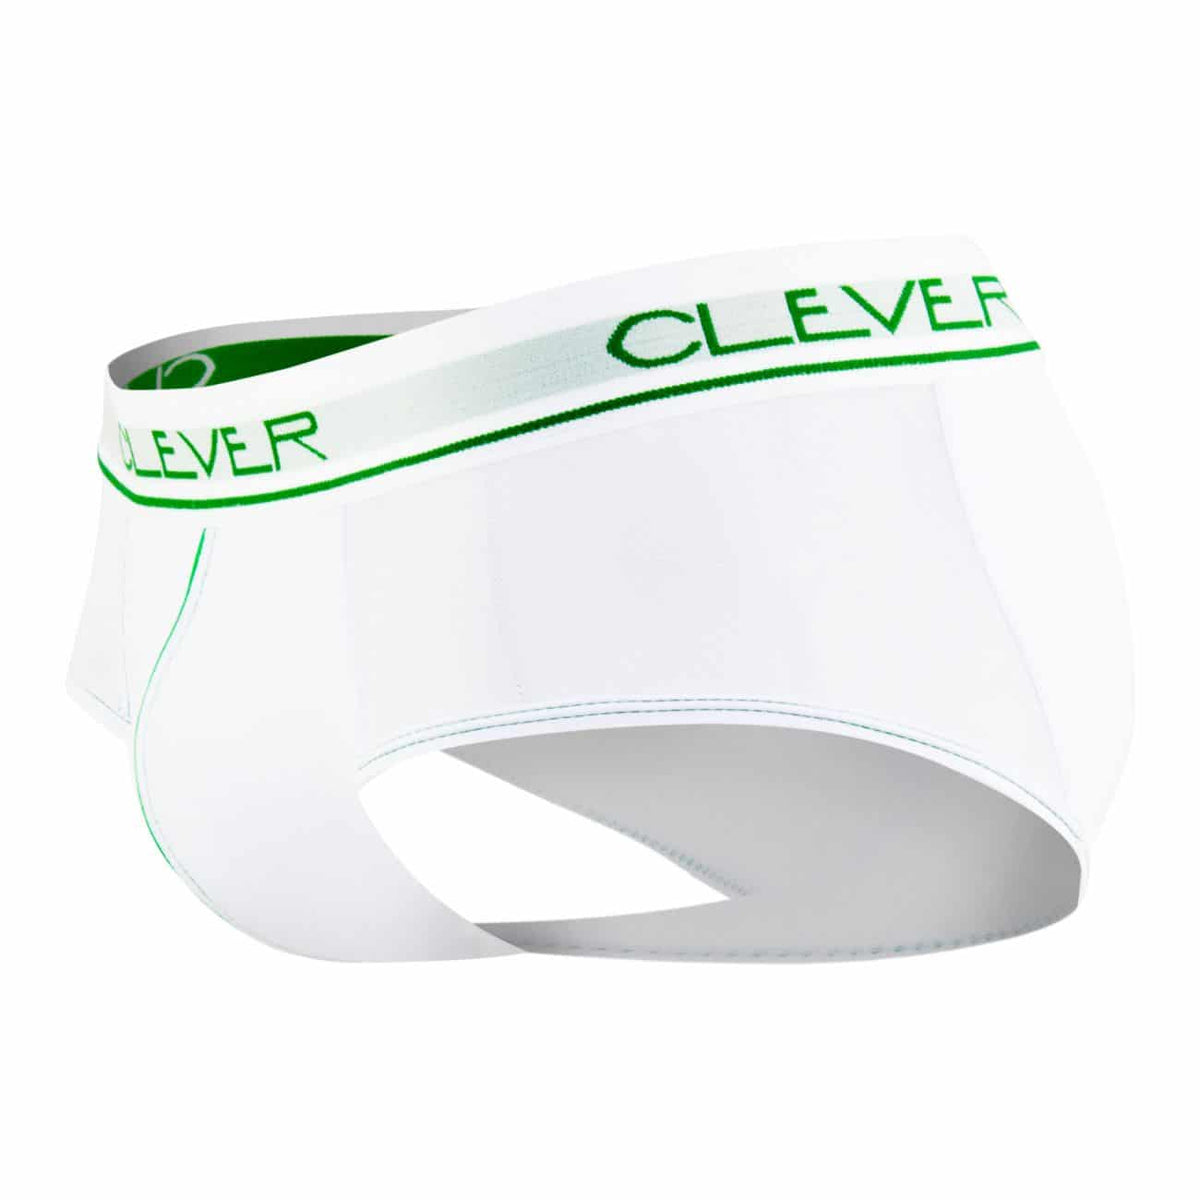 CLEVER MODA--Soul Piping Brief--men's underwear or swimwear, АUTHЕNTIC and  NEW